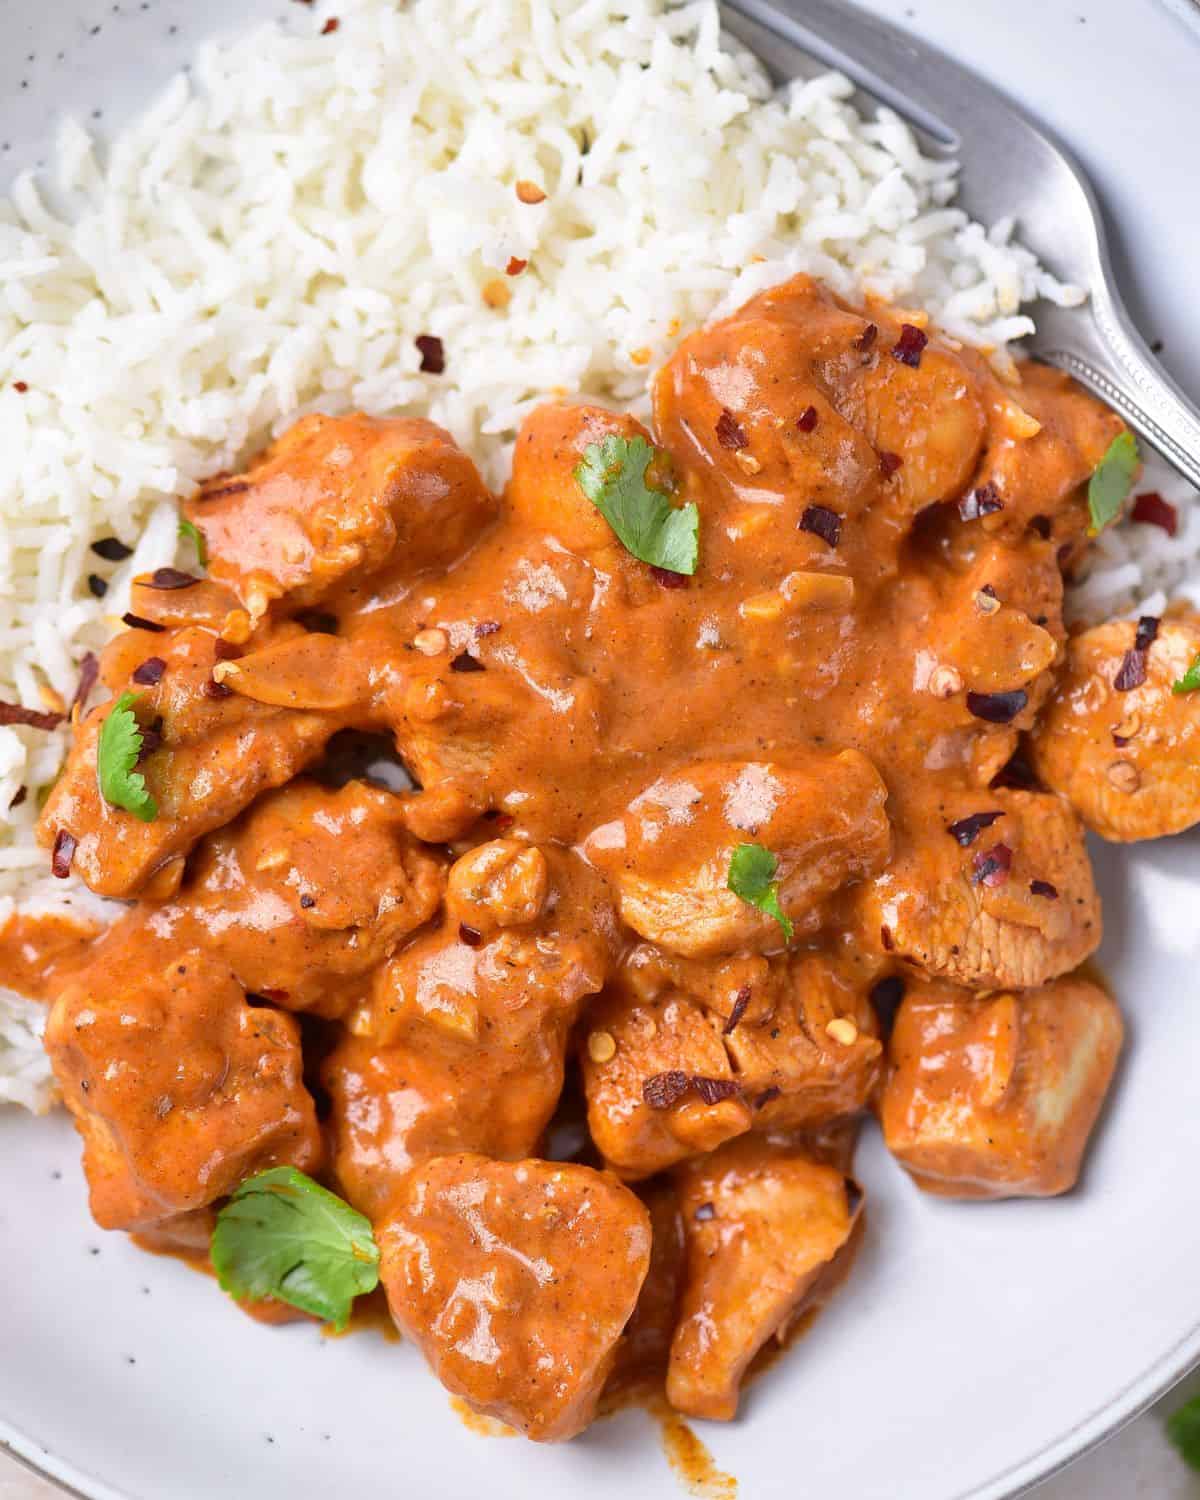 Chicken curry with rice on a plate.